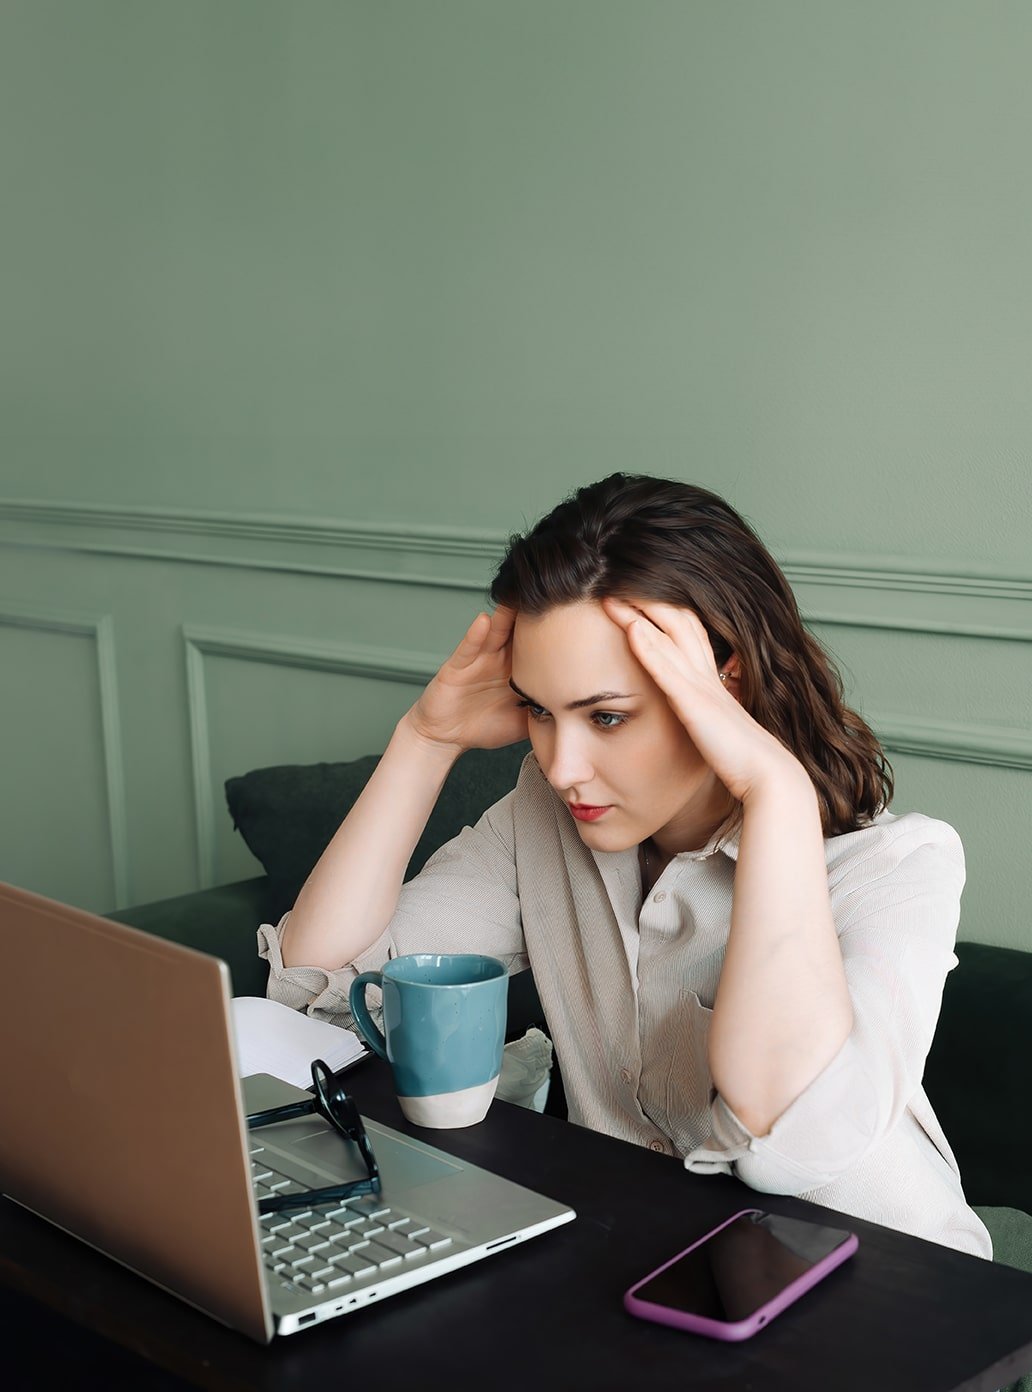 A woman looks focused and stressed while working on a laptop at a desk with a smartphone and troubleshooting top WordPress issues beside her.